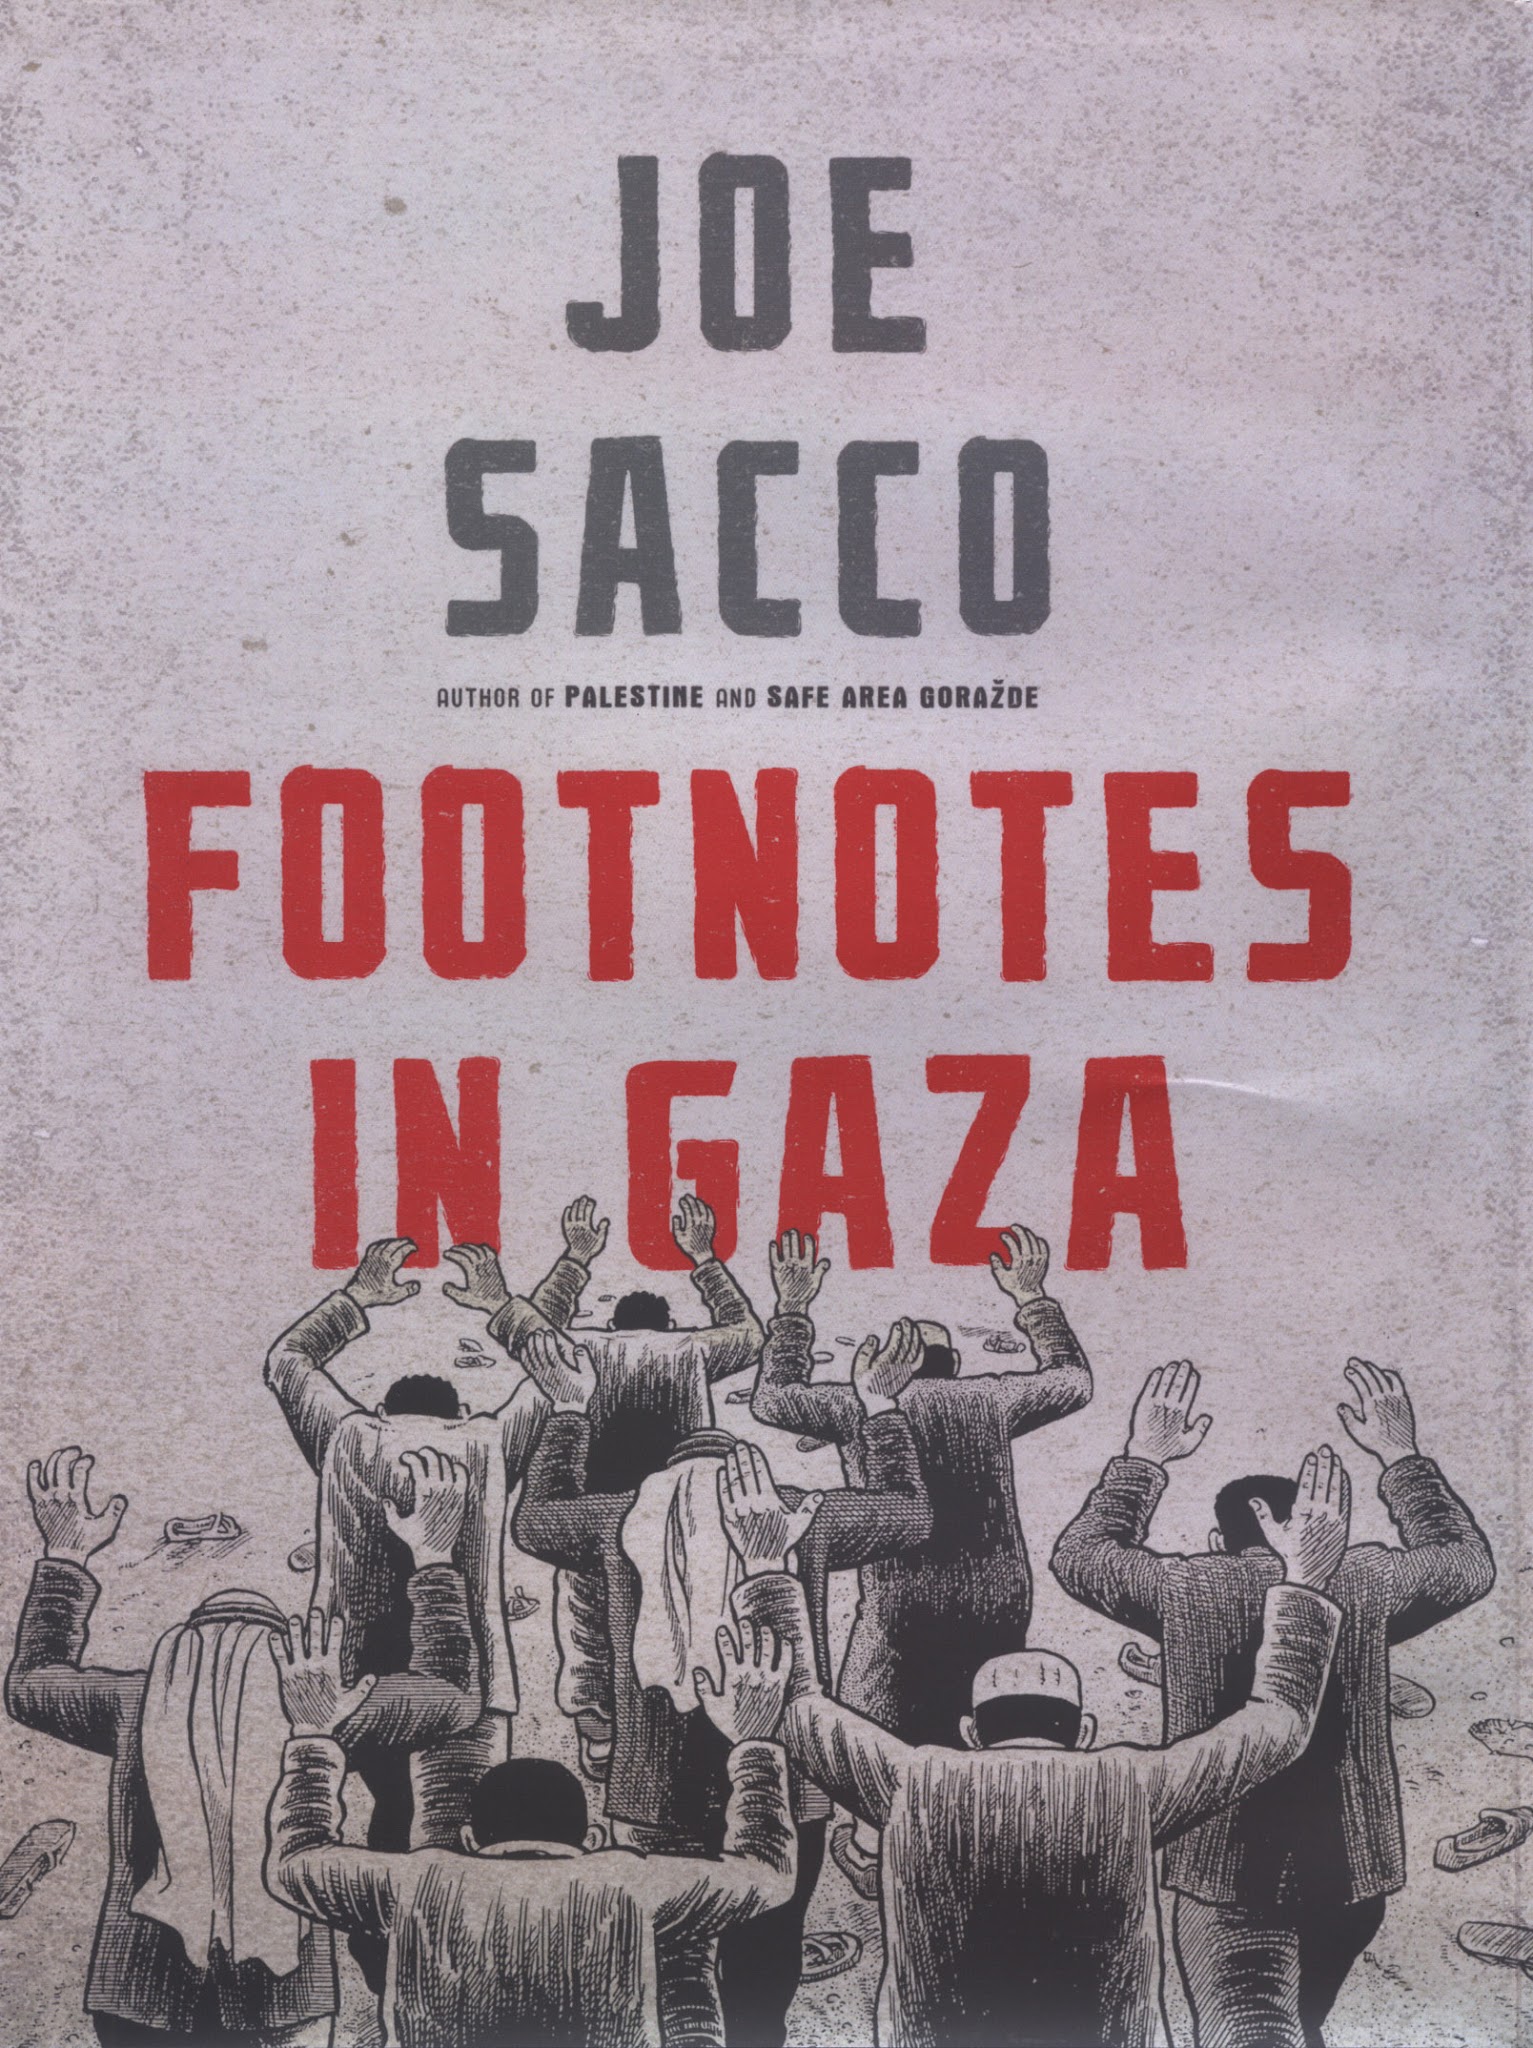 Read online Footnotes in Gaza comic -  Issue # TPB - 1